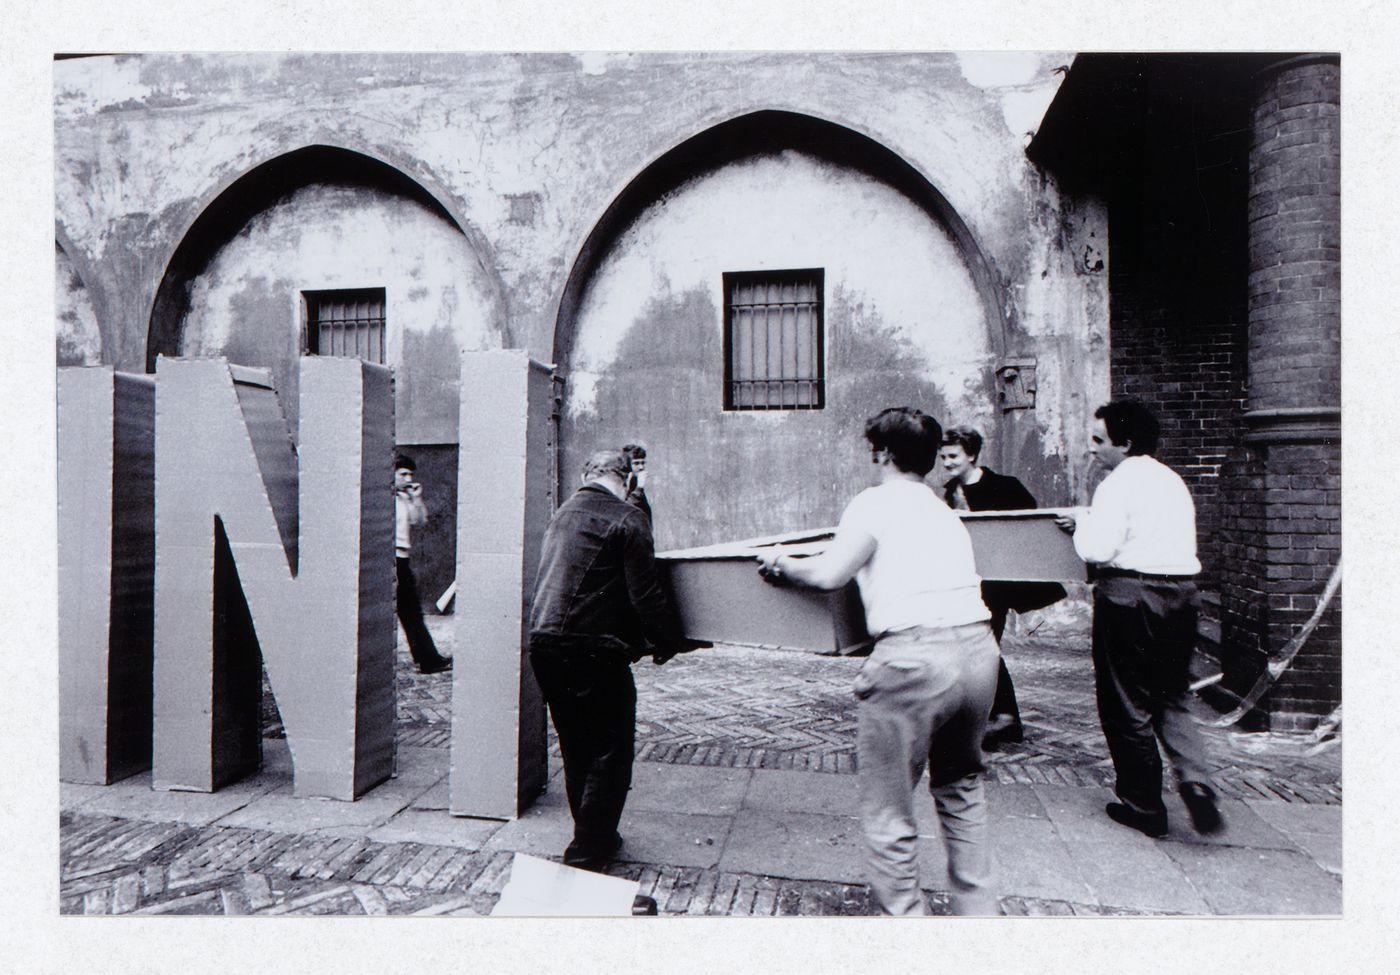 Photograph of the construction of the installation for Carabinieri